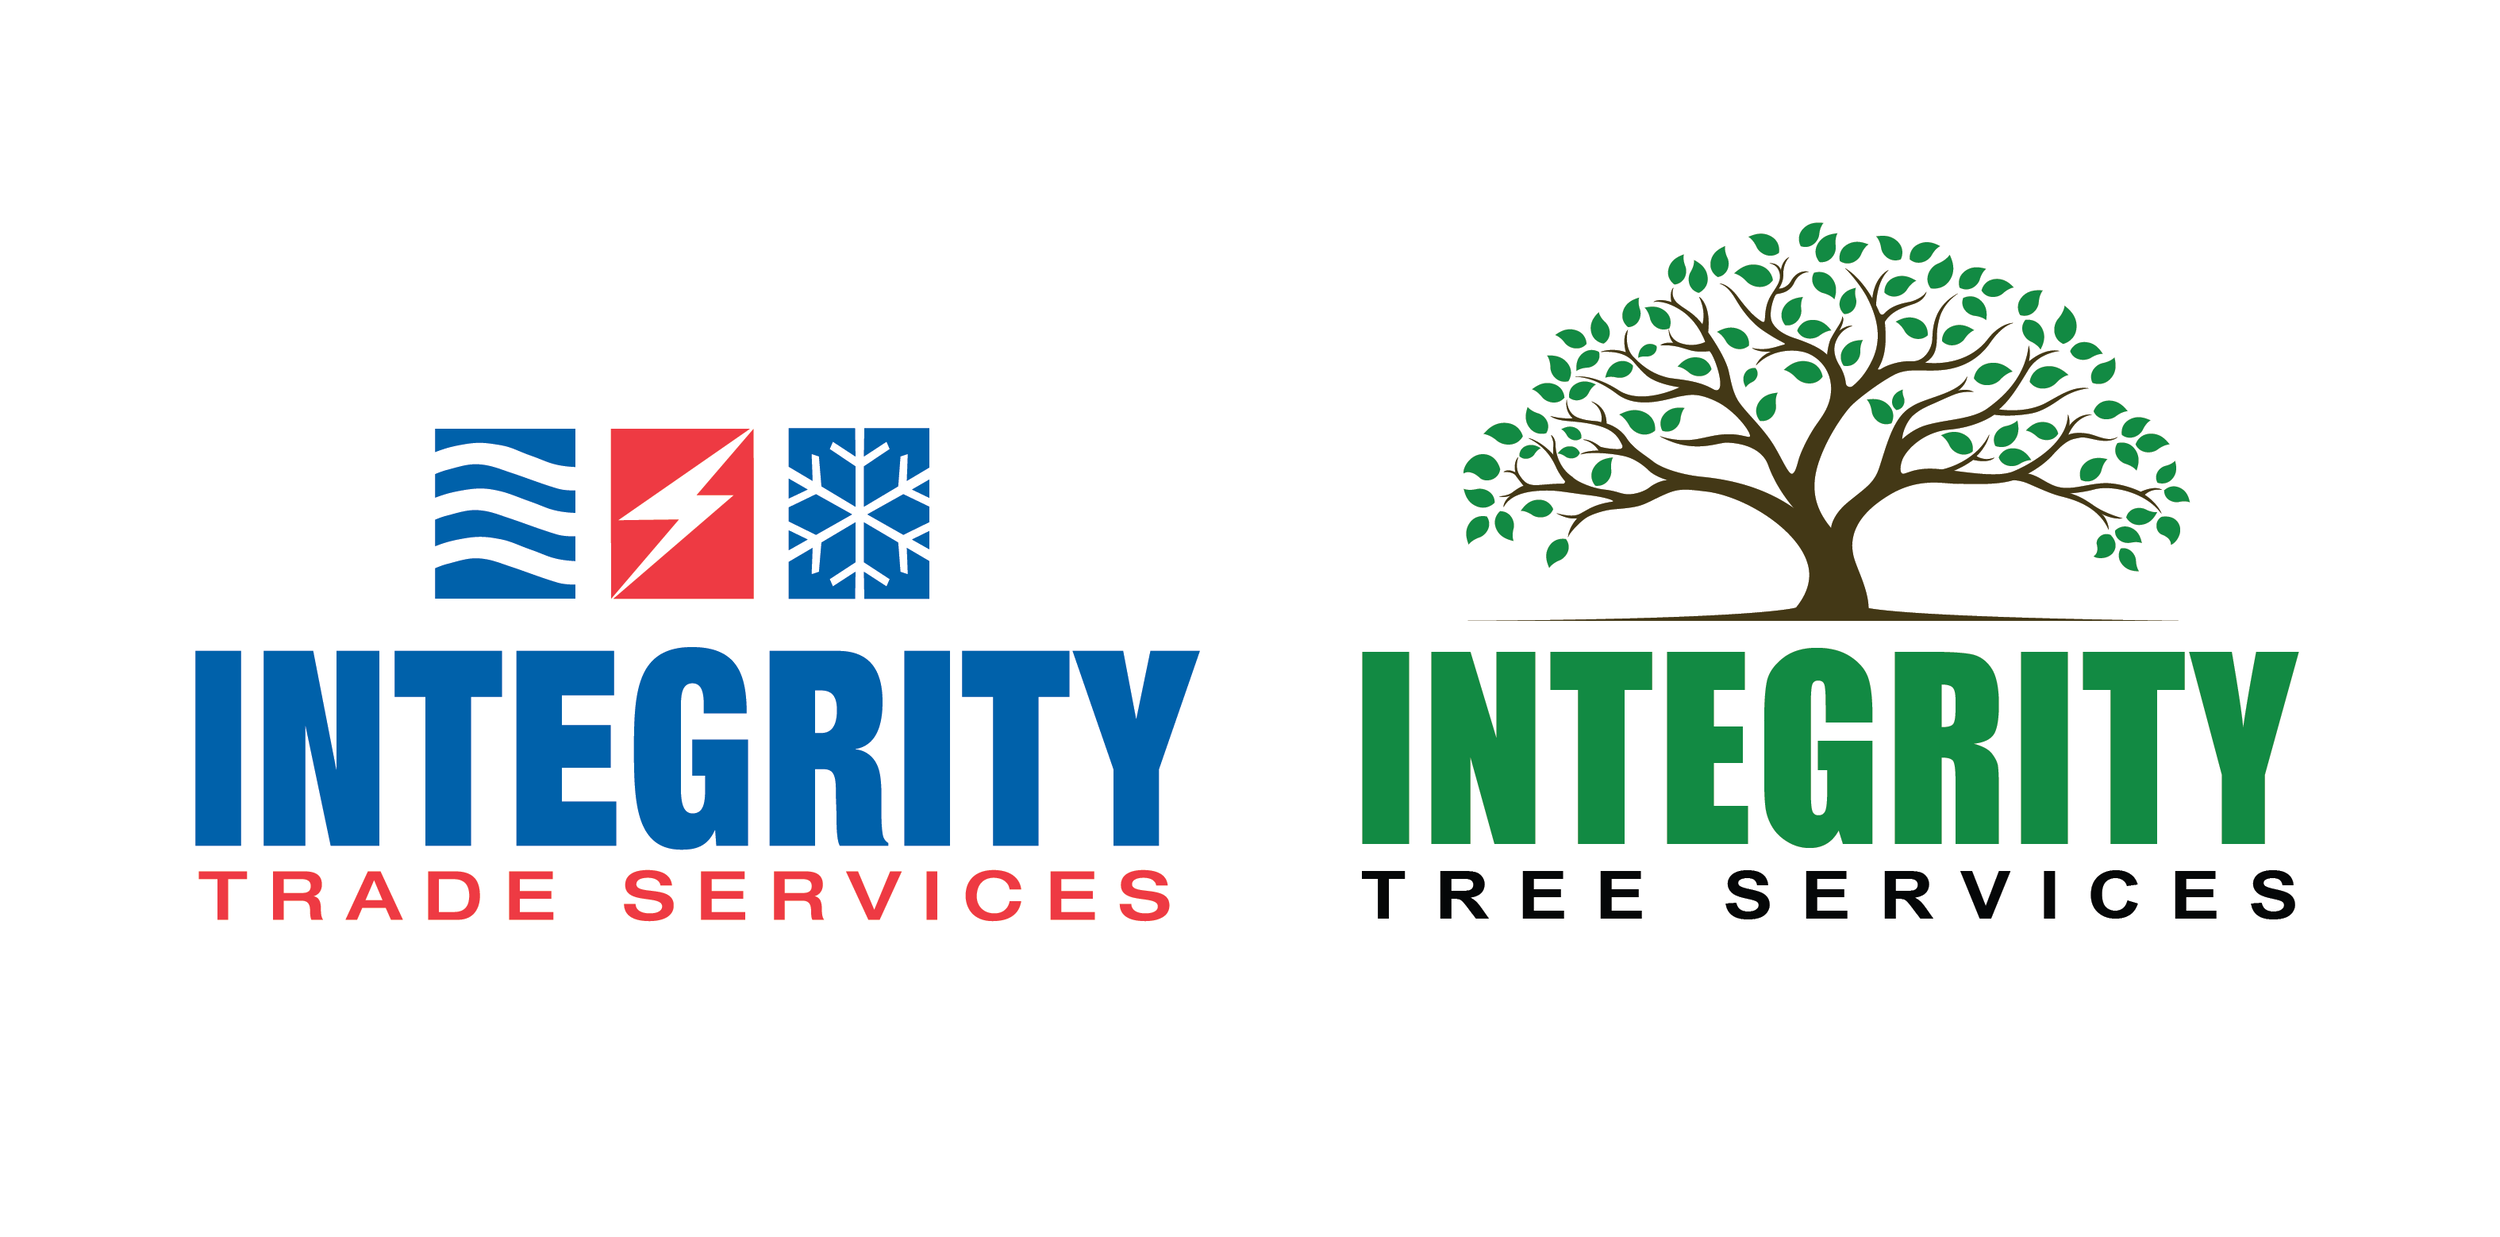 Integrity Trade Services and Integrity Tree Services